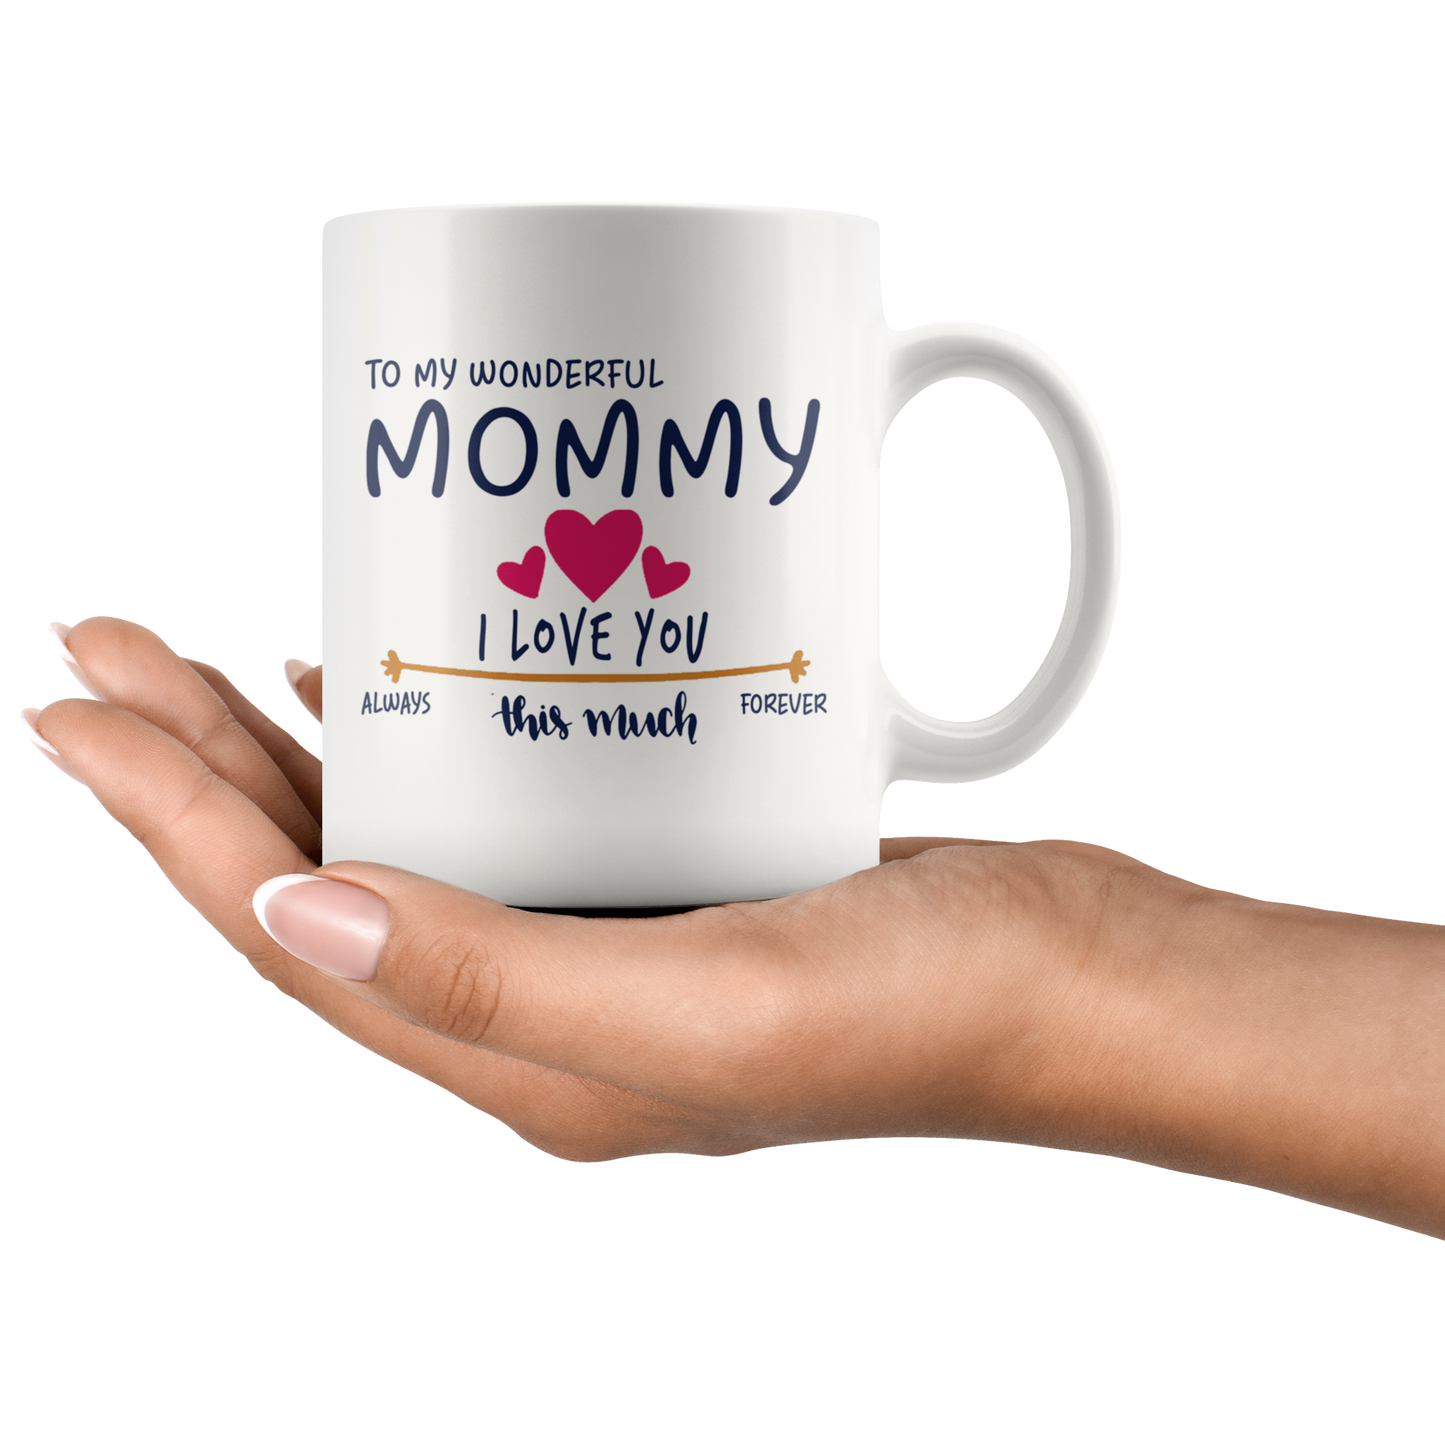 M-20470216-sp-24029 - [ Mommy | 1 ]Mom Day Gifts From Daughter or Son - To My Wonderful Mommy I